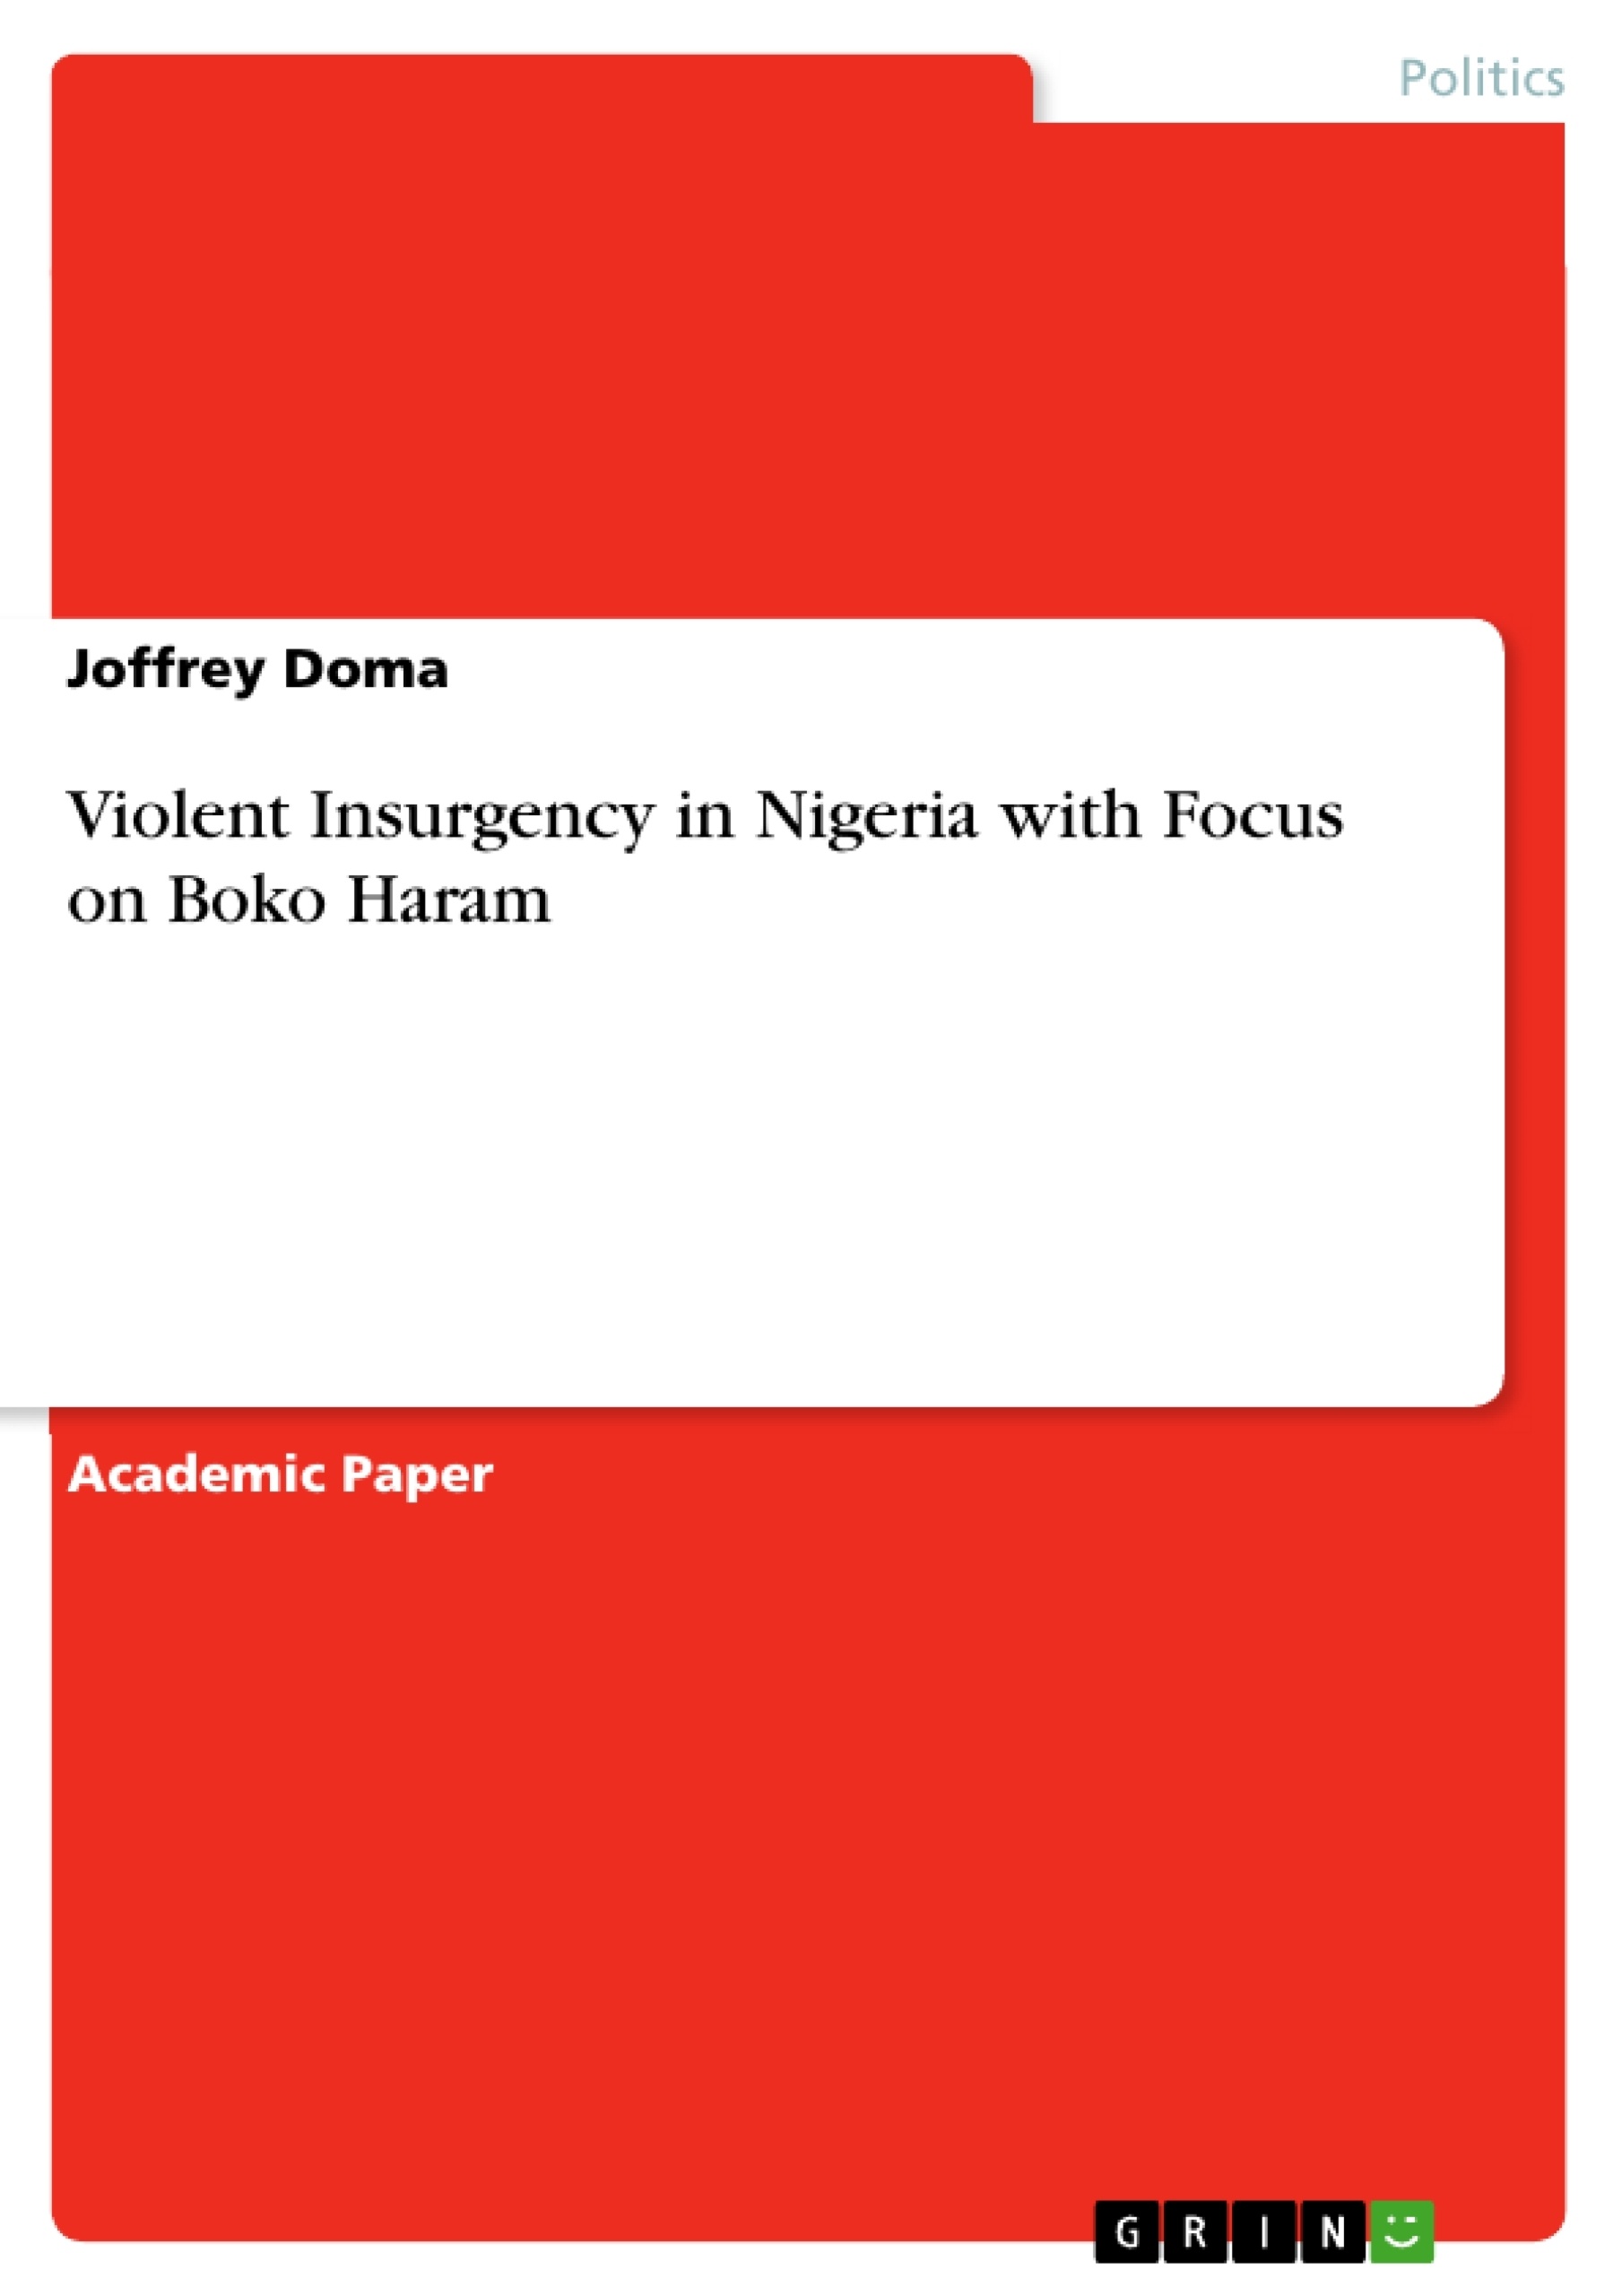 Title: Violent Insurgency in Nigeria with Focus on Boko Haram